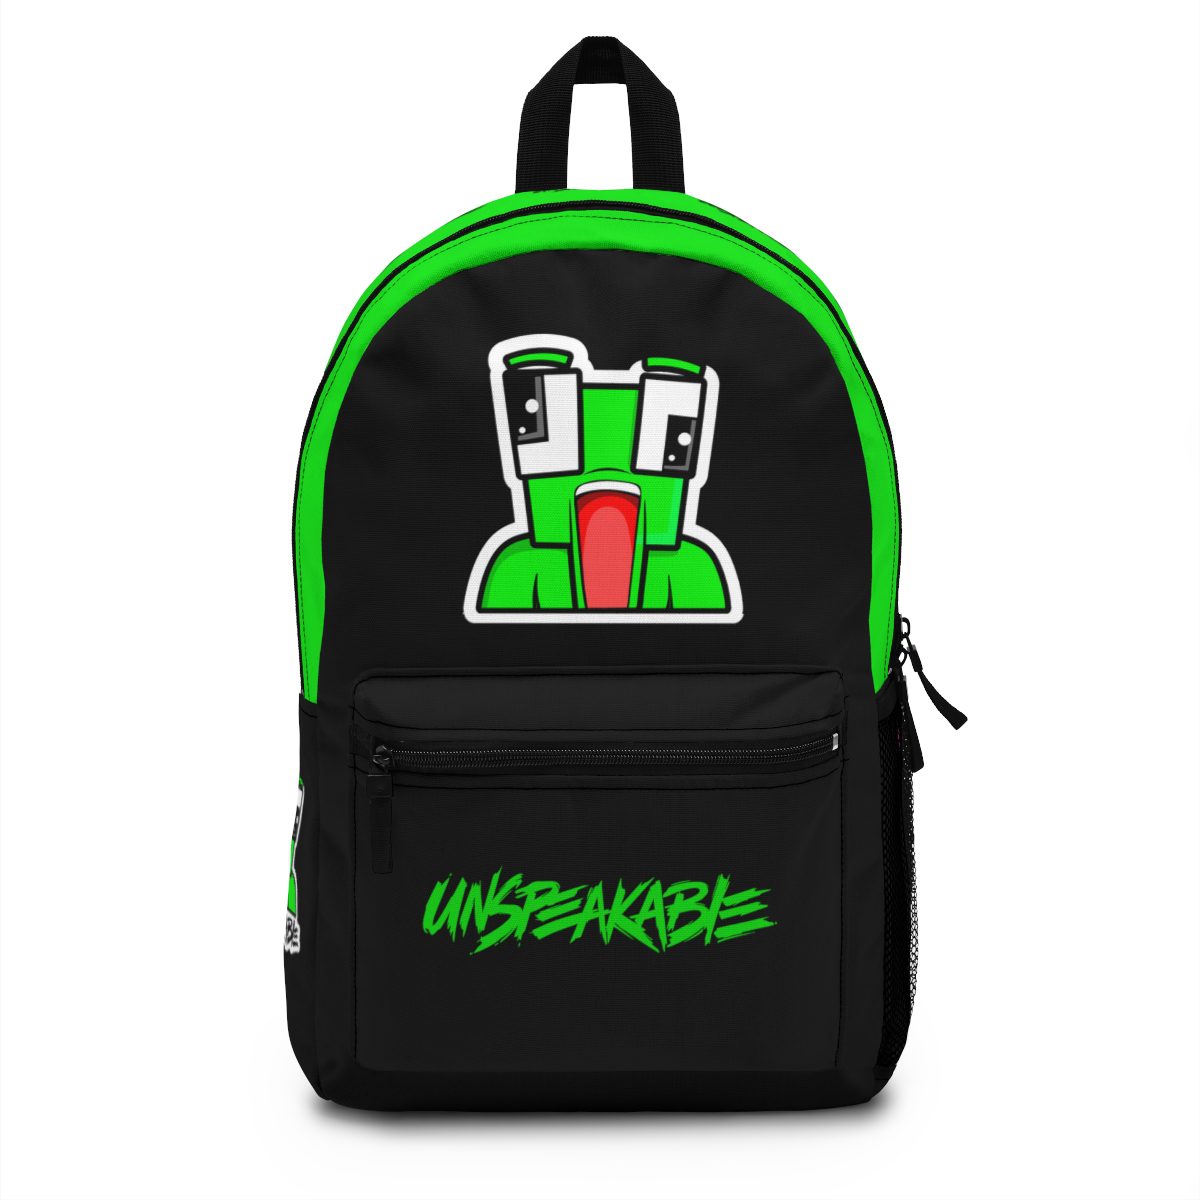 Unspeakable Gaming YouTube Channel Backpack in Black and Neon Green Cool Kiddo 15